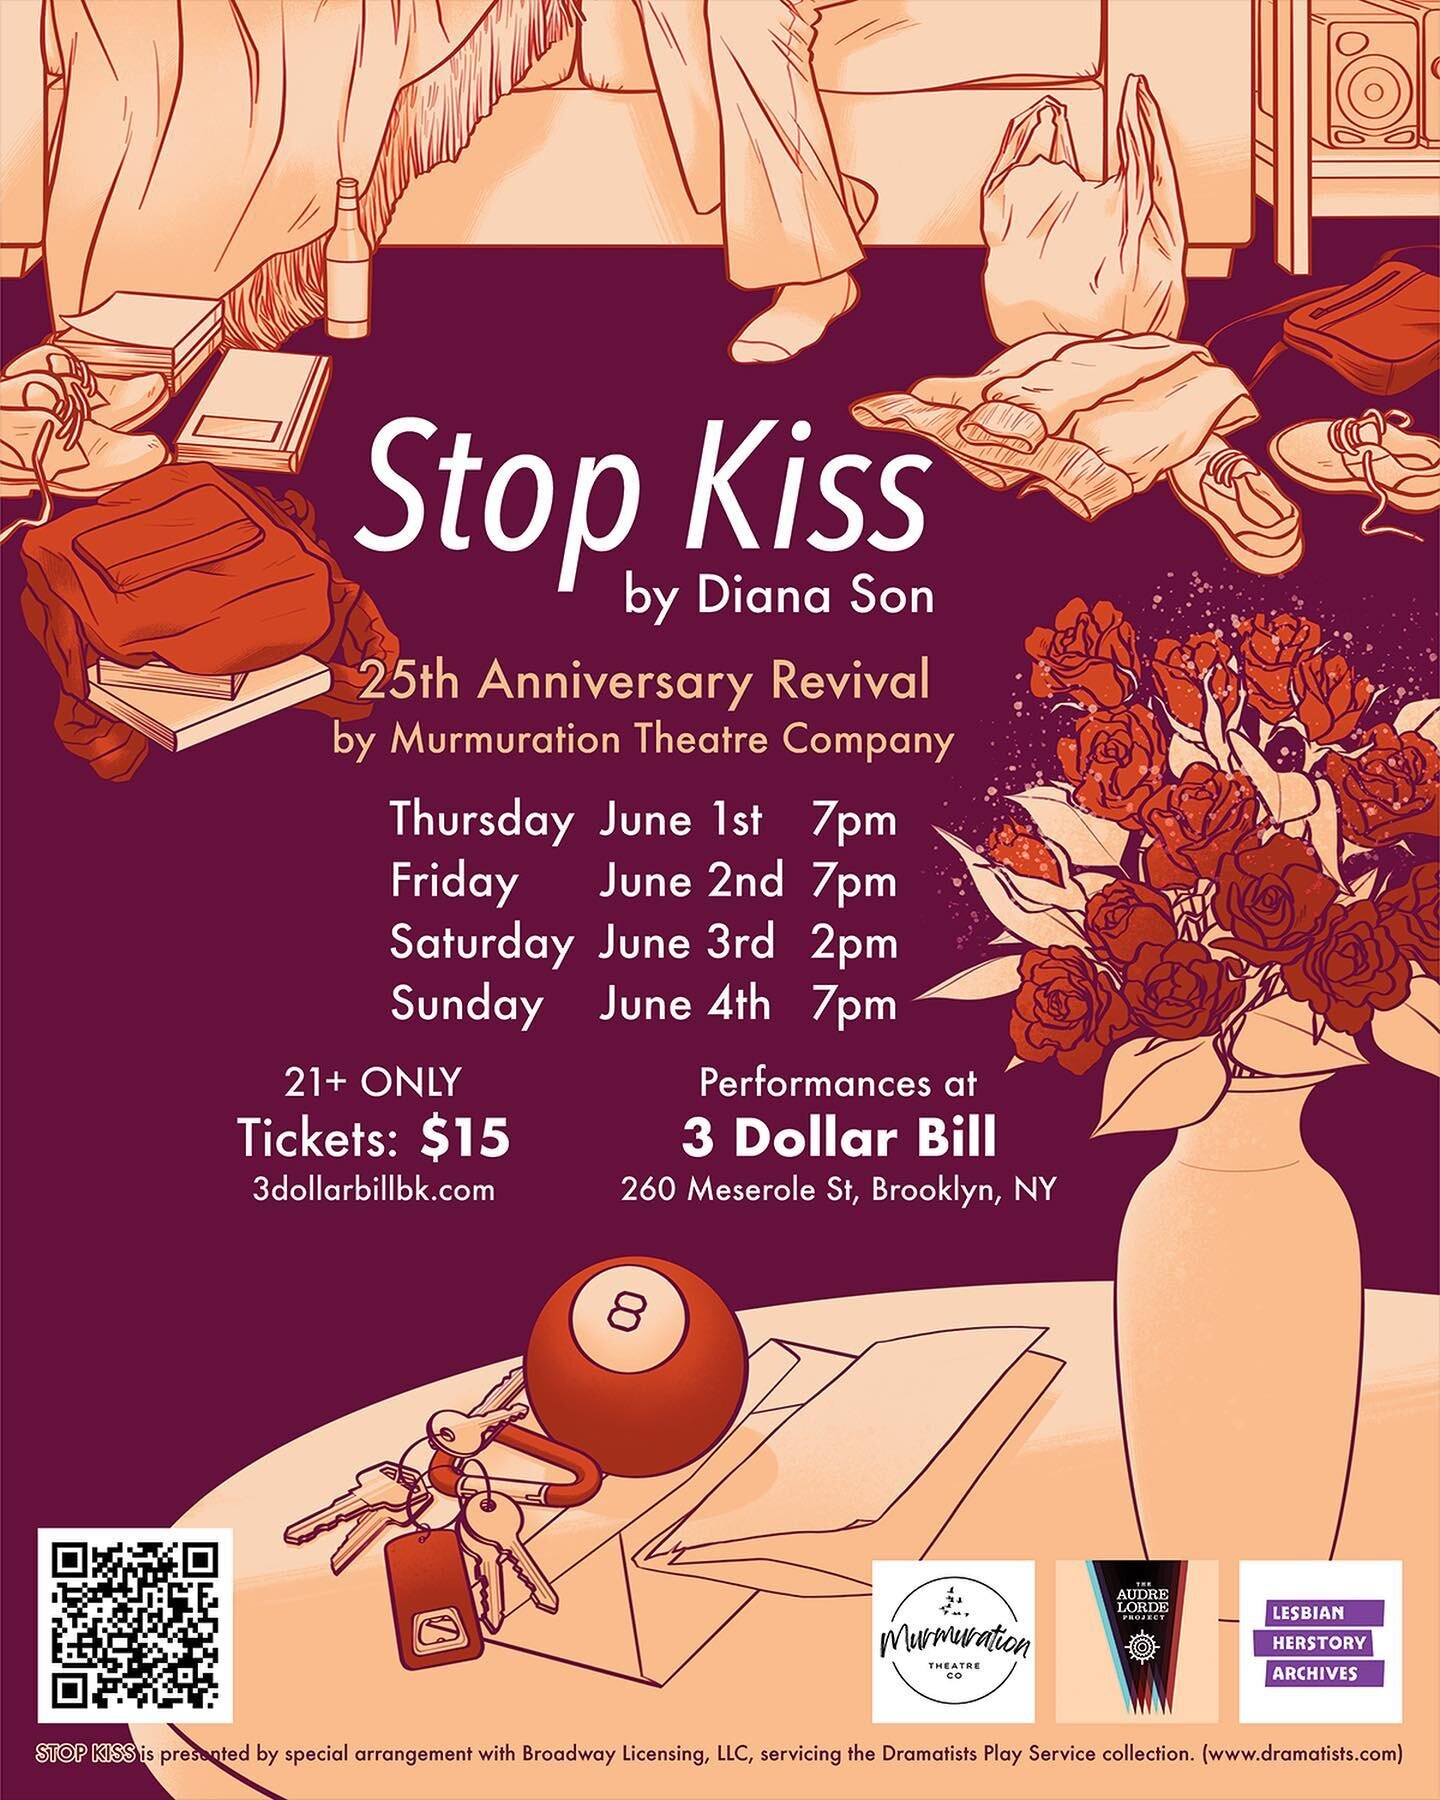 🏳️&zwj;🌈🎟TIX IN BIO🎟🏳️&zwj;🌈
Starting off #pridemonth with a 25th Anniversary Production of Diana Son&rsquo;s iconic queer play STOP KISS from @murmurationtheatreco at @3dollarbillbk 
.
.
.
.
.
.
.
.
.
.
.
.
.
.
.
.
#lgbt #lgbtq #pride #theatre